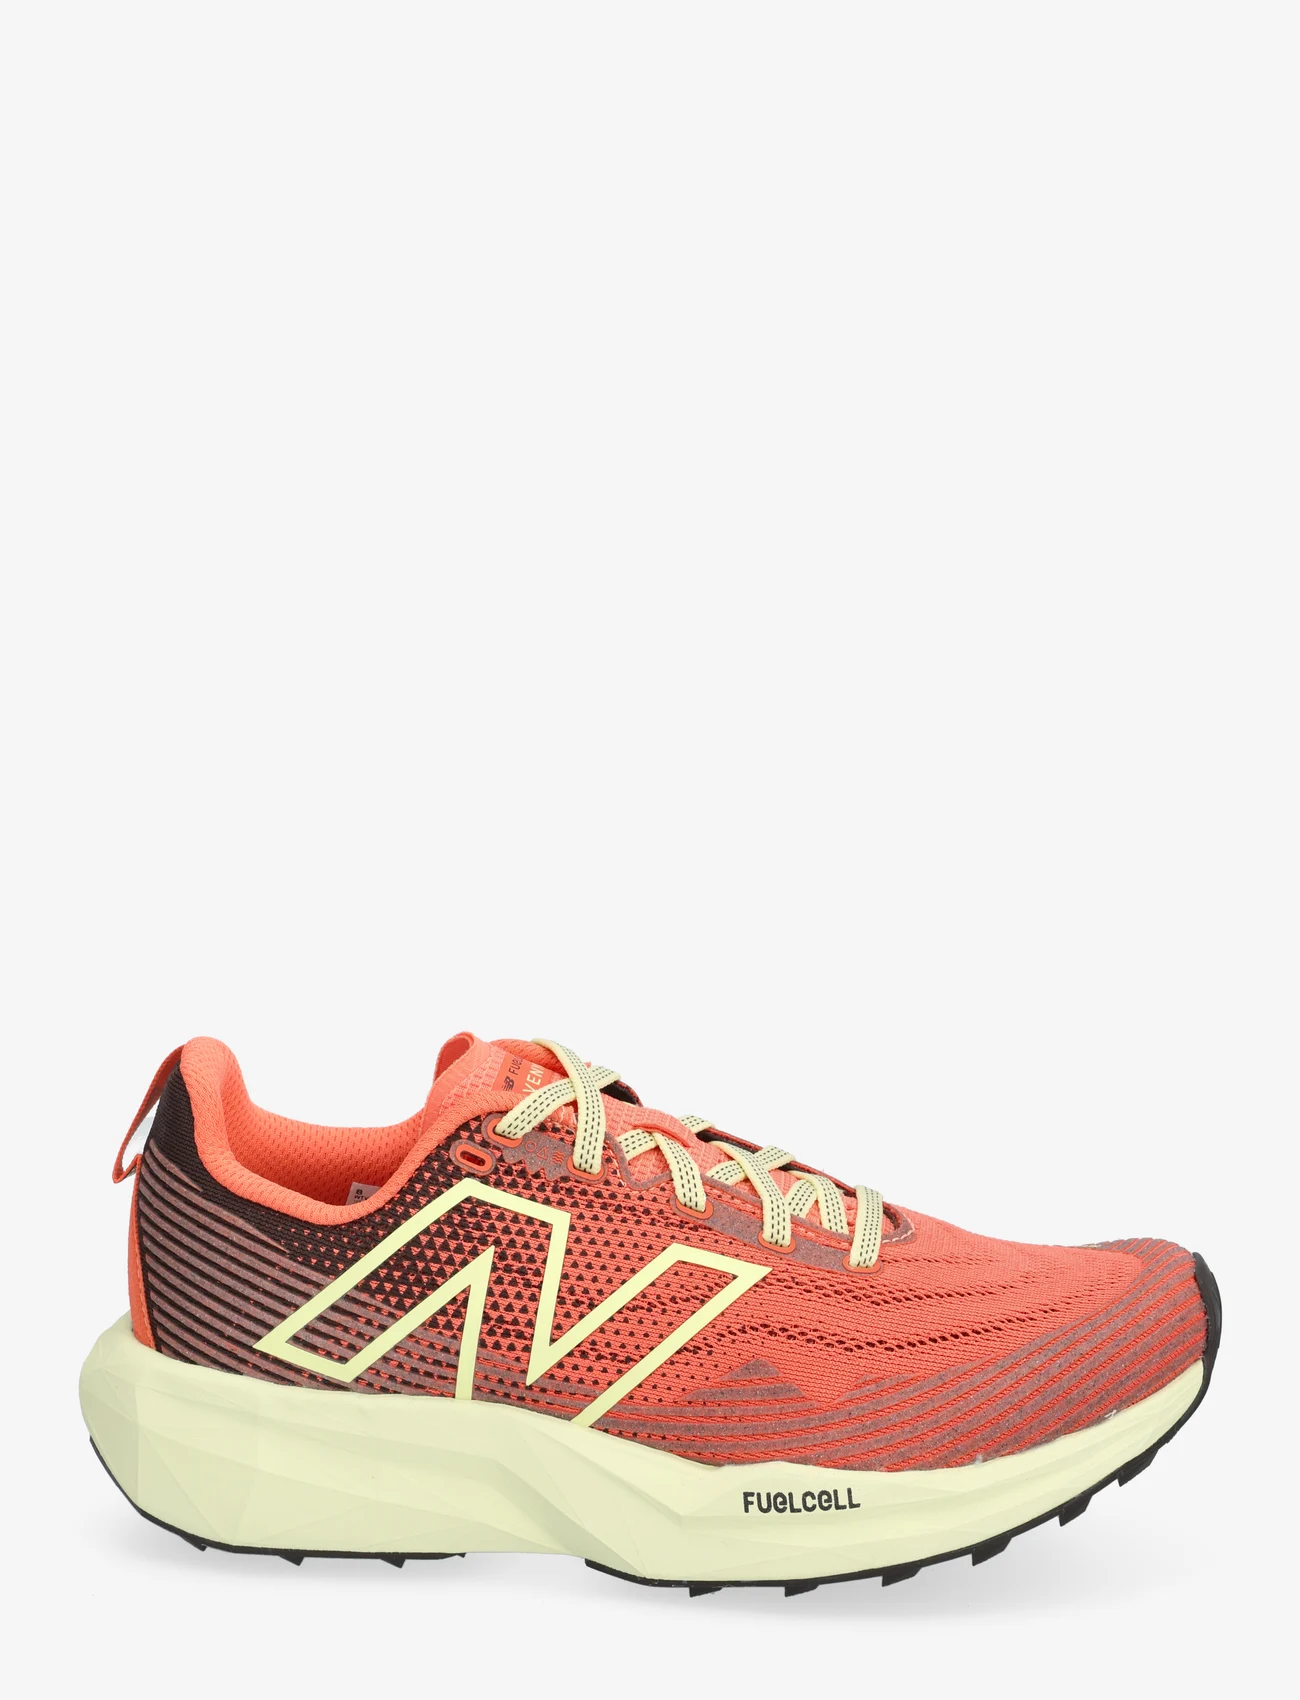 New Balance - New Balance FuelCell Summit Unknown v5 - running shoes - gulf red - 1